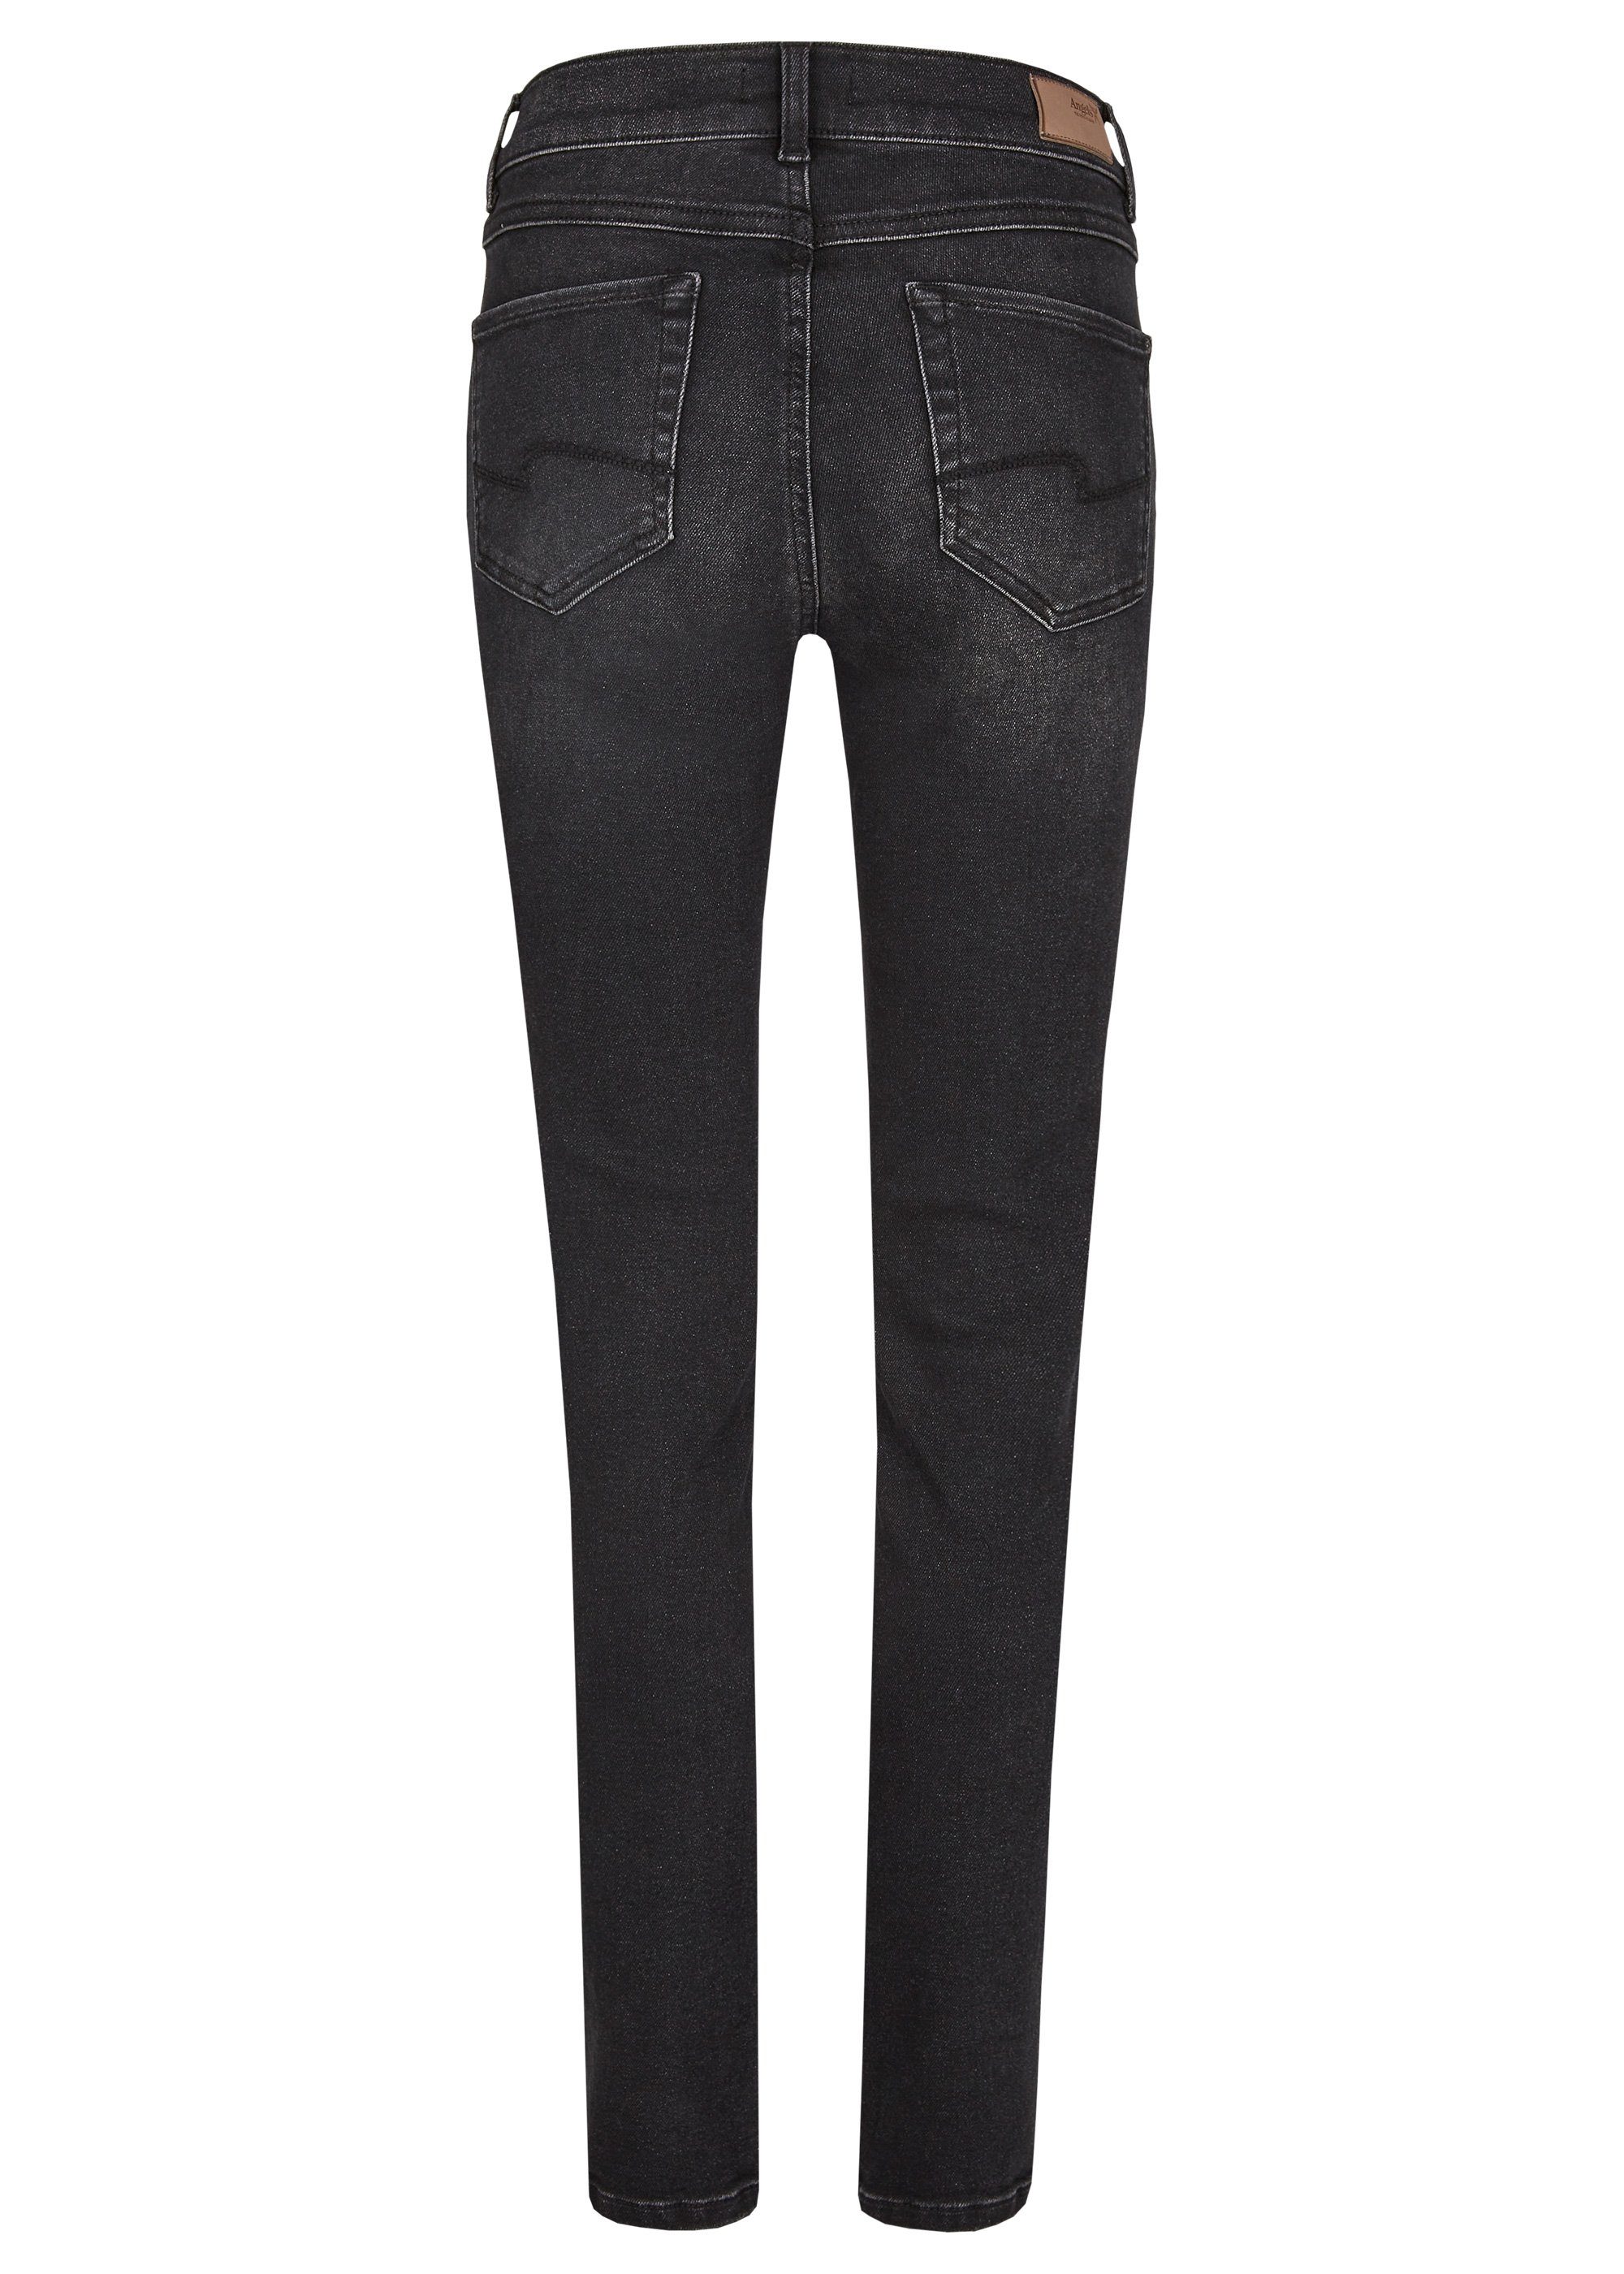 SKINNY black ANGELS 325 ANGELS STRETCH - Stretch-Jeans JEANS used 12.1058